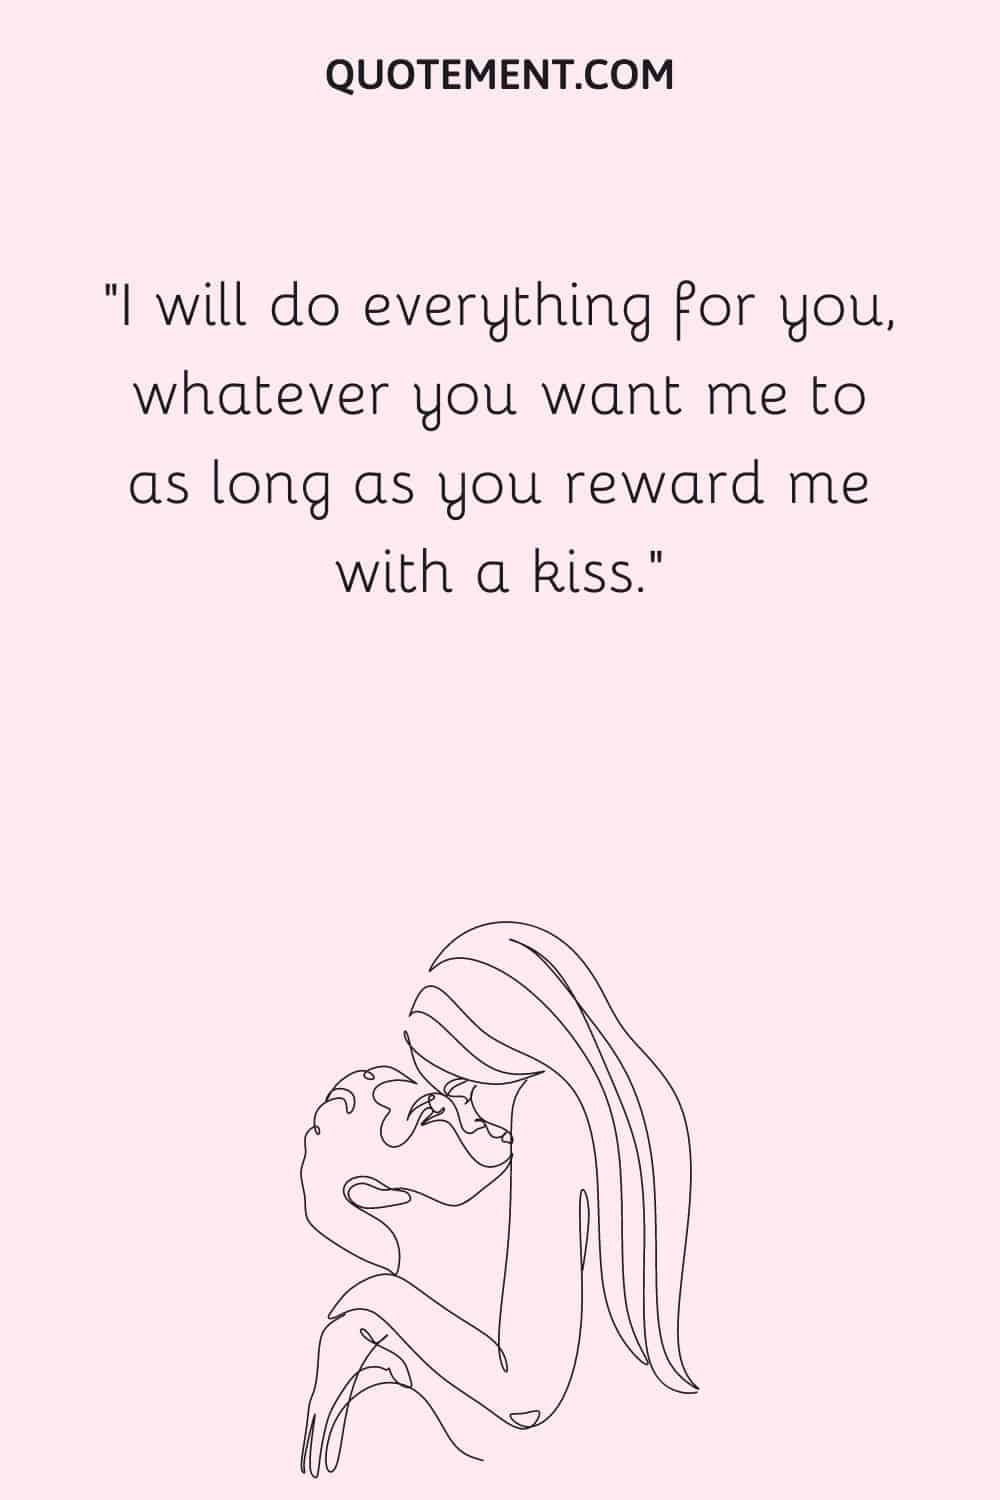 I will do everything for you, whatever you want me to as long as you reward me with a kiss.